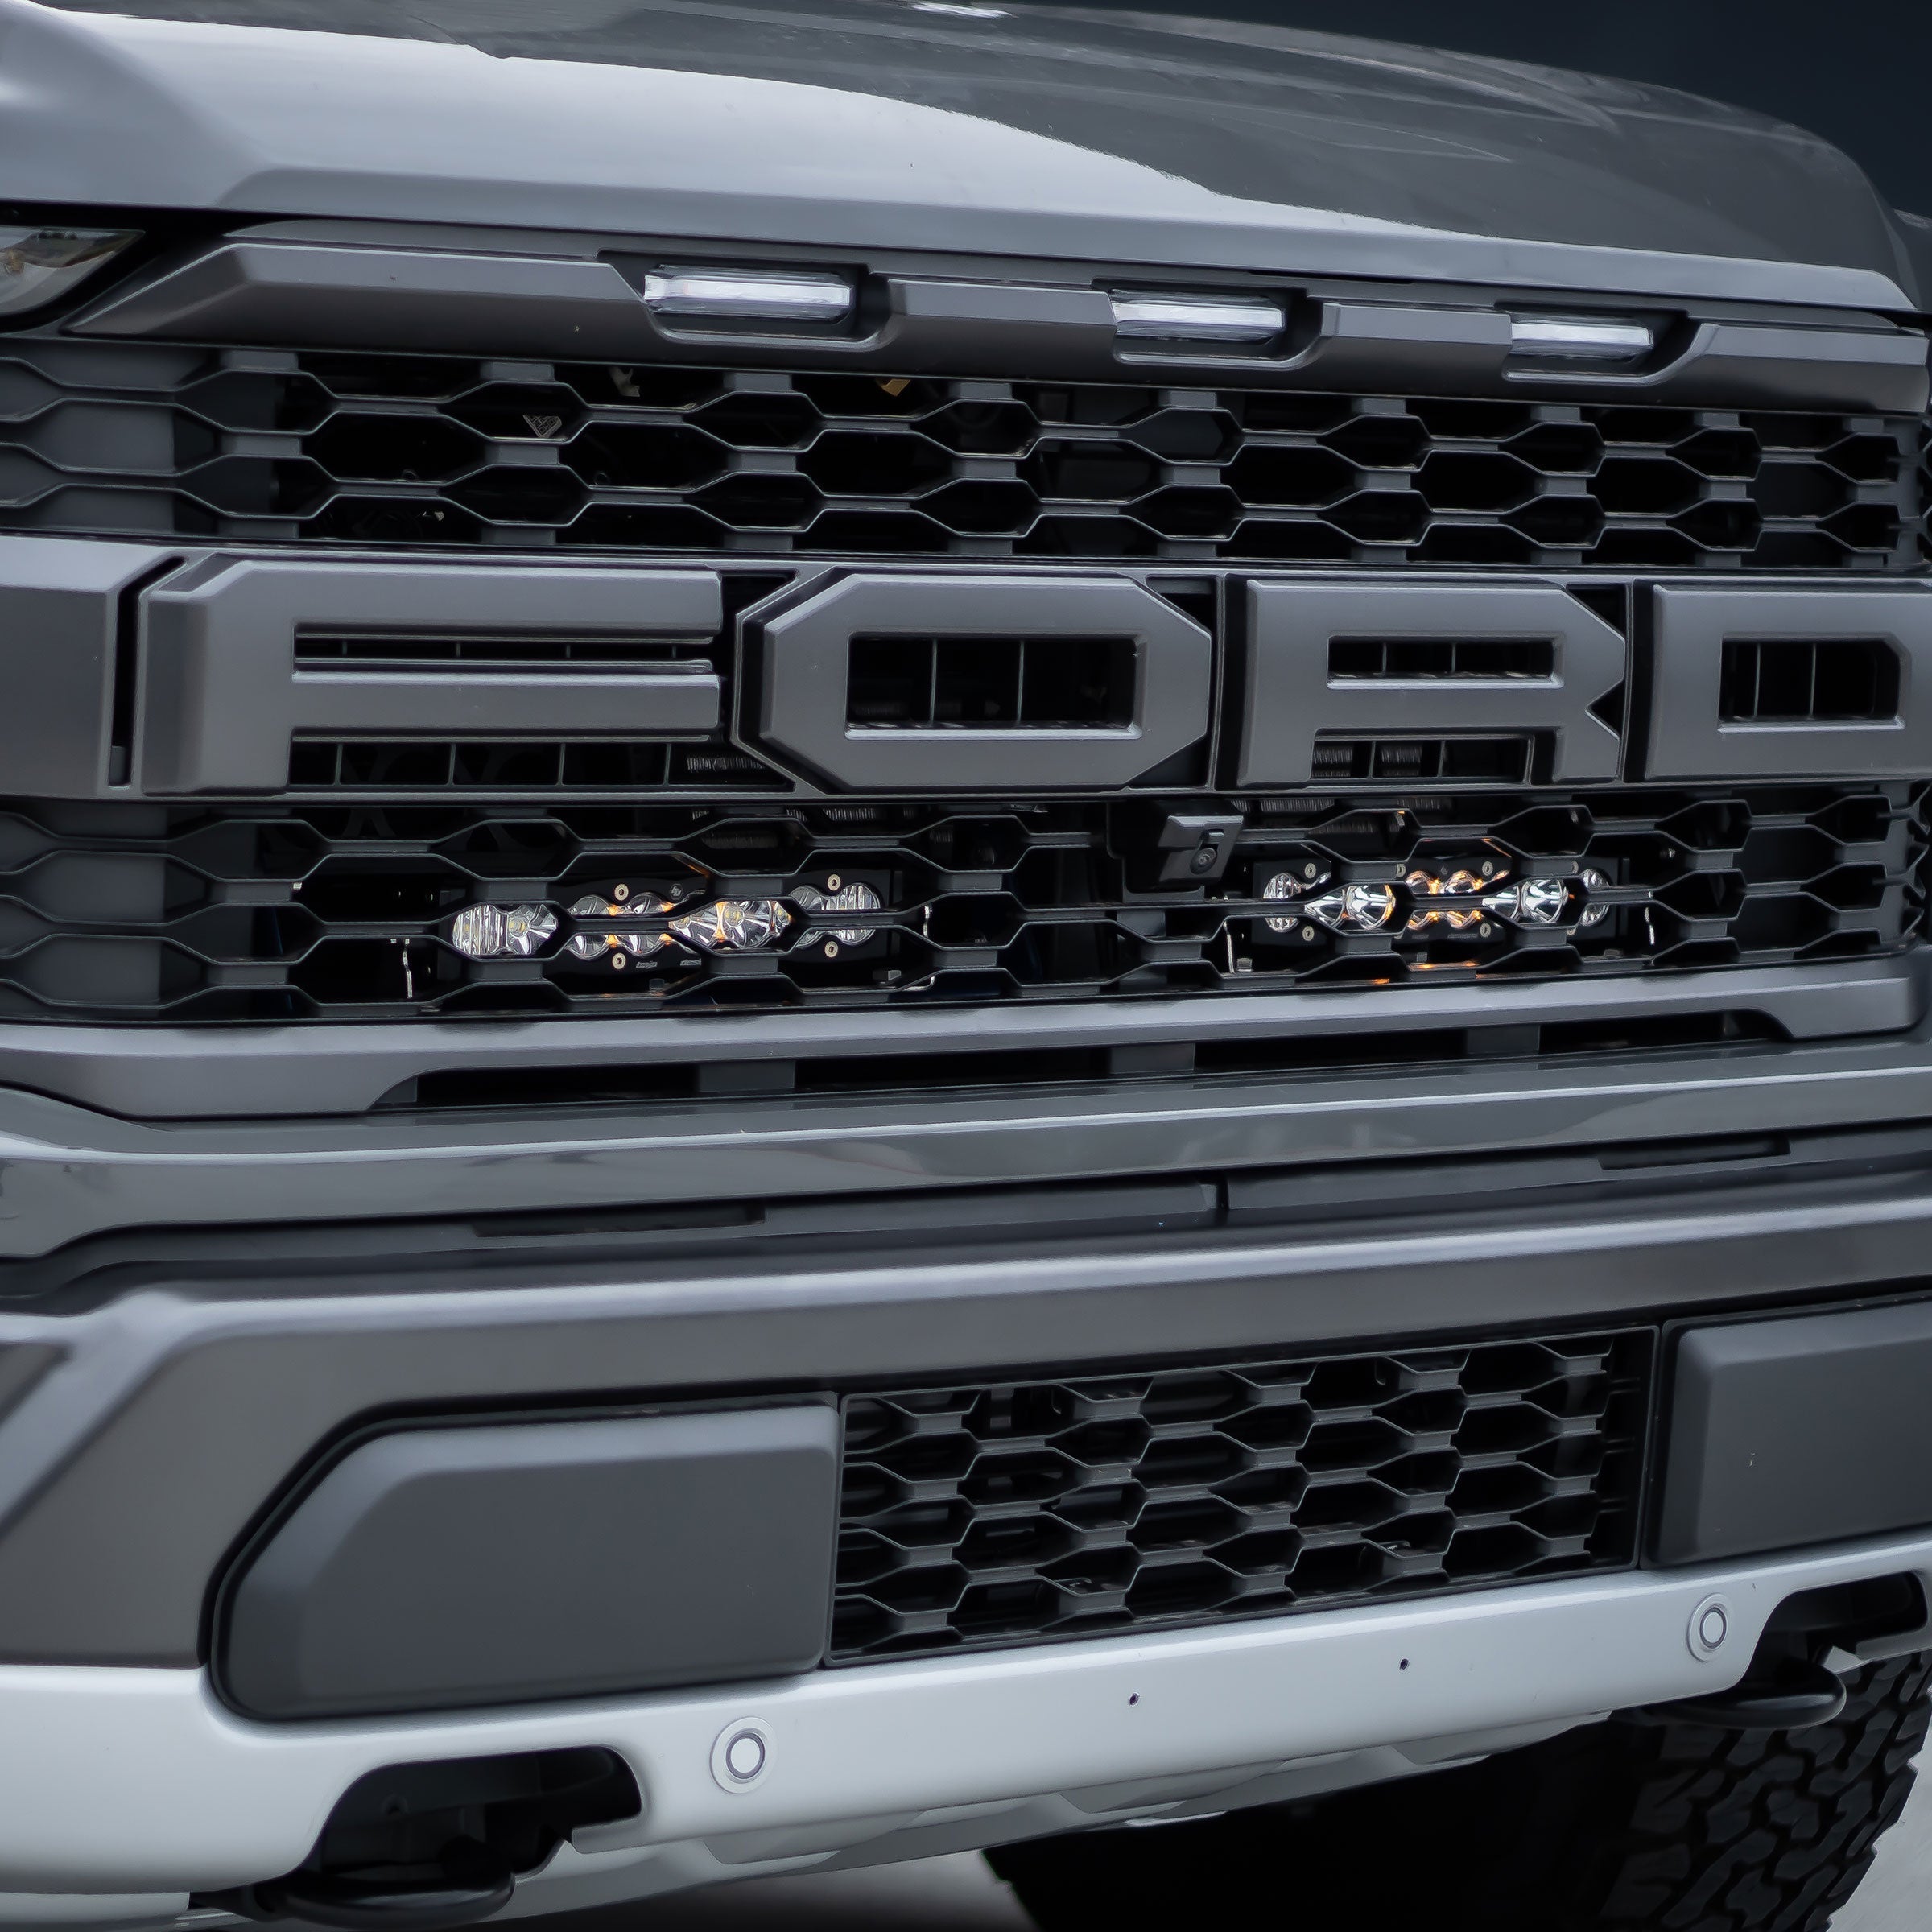 SPV Parts Customizable - Baja Designs S8 10 Inch Dual Behind Grille Light Bar Kit fit 21-On Ford Raptor